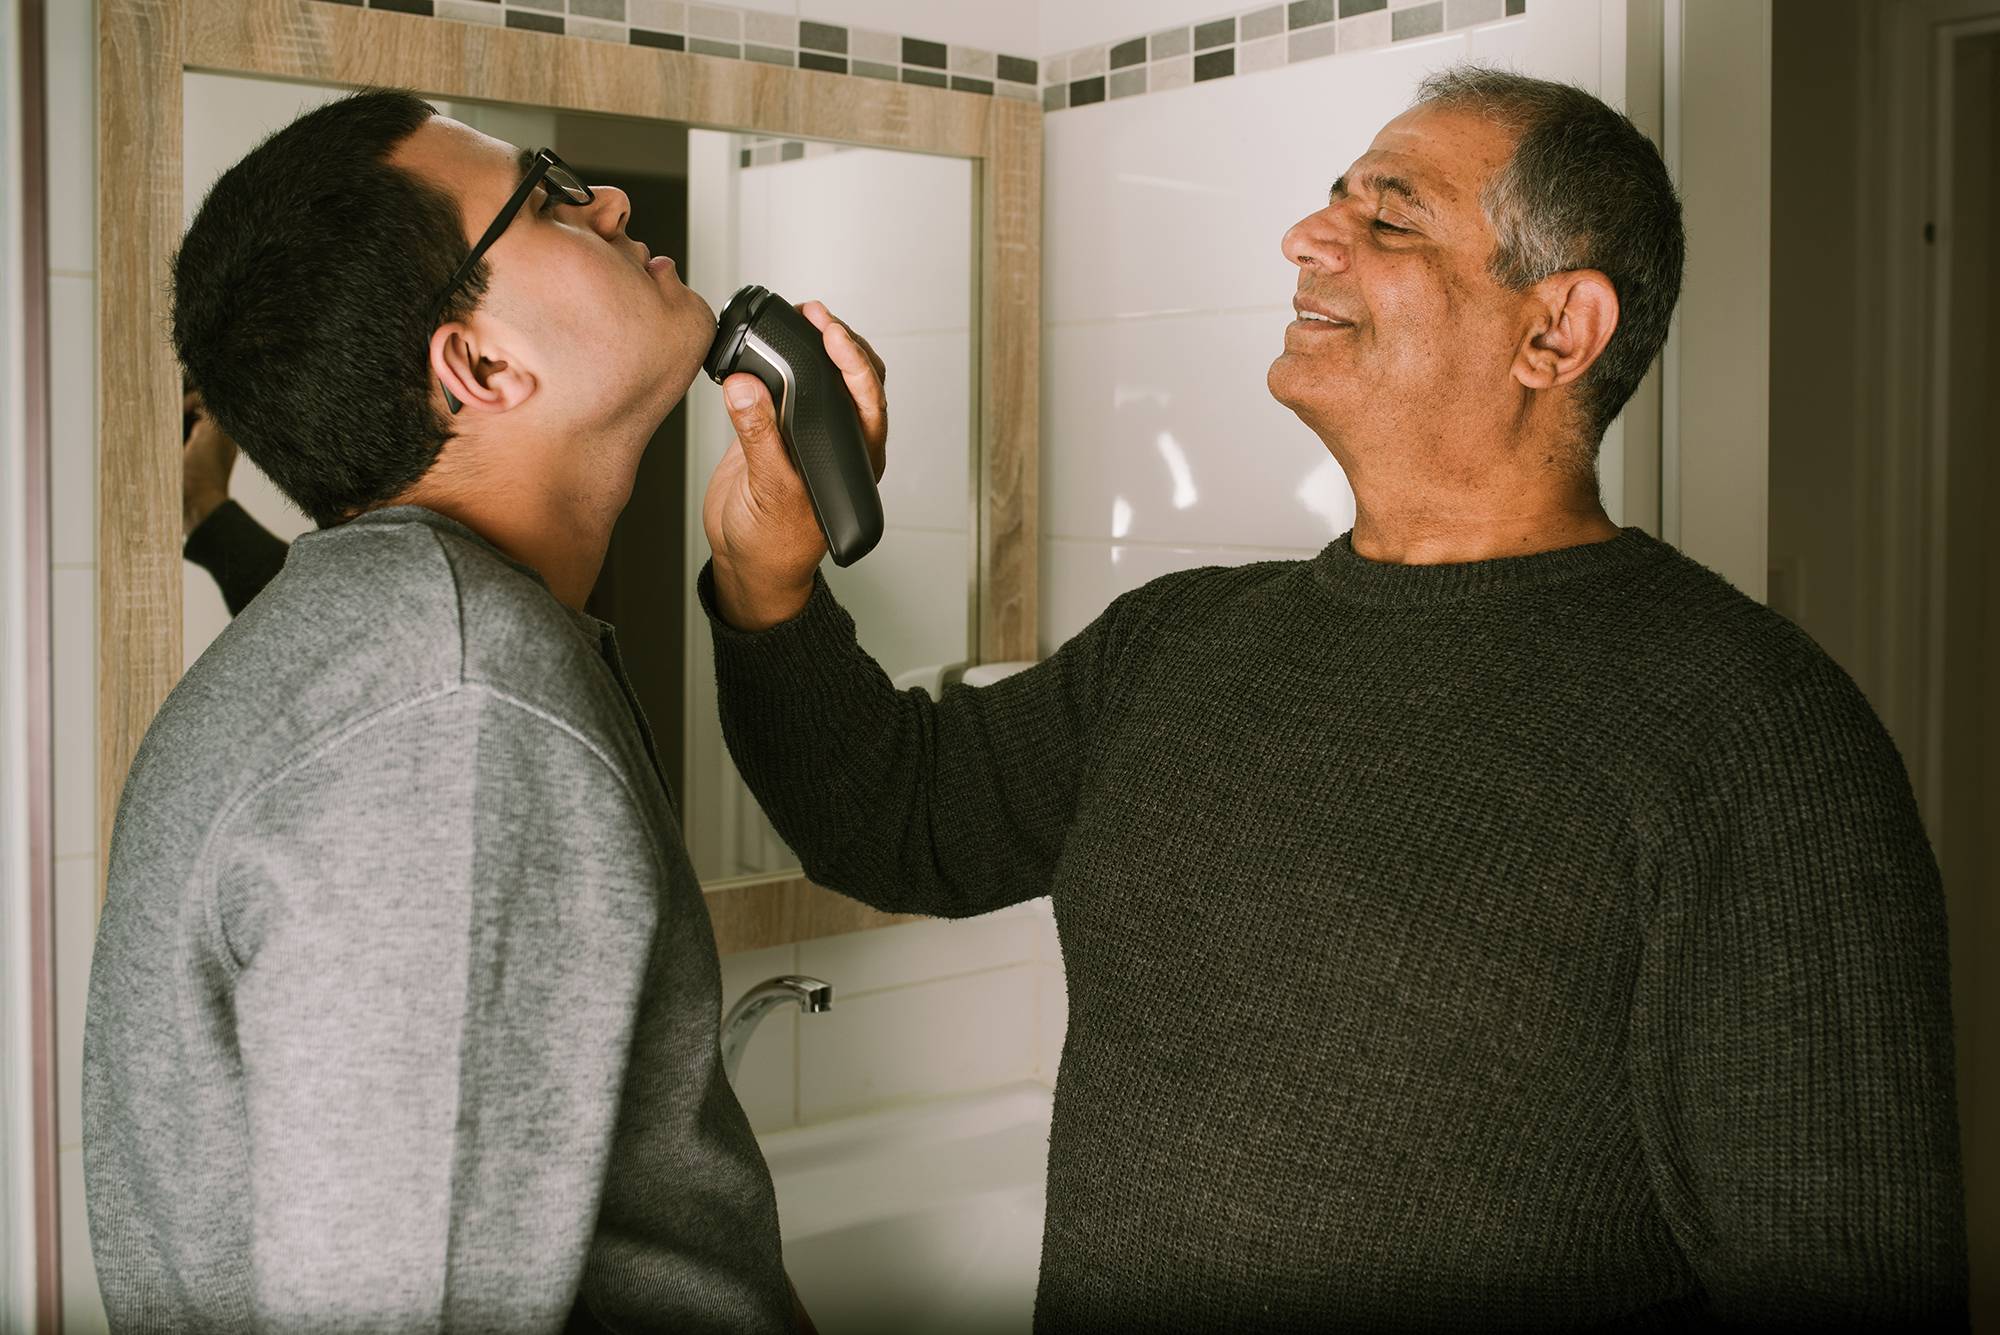 Grandfather Mentors a Teenager, Teaching Him How to Shave with an Electric Razor Near the Bathroom Mirror.